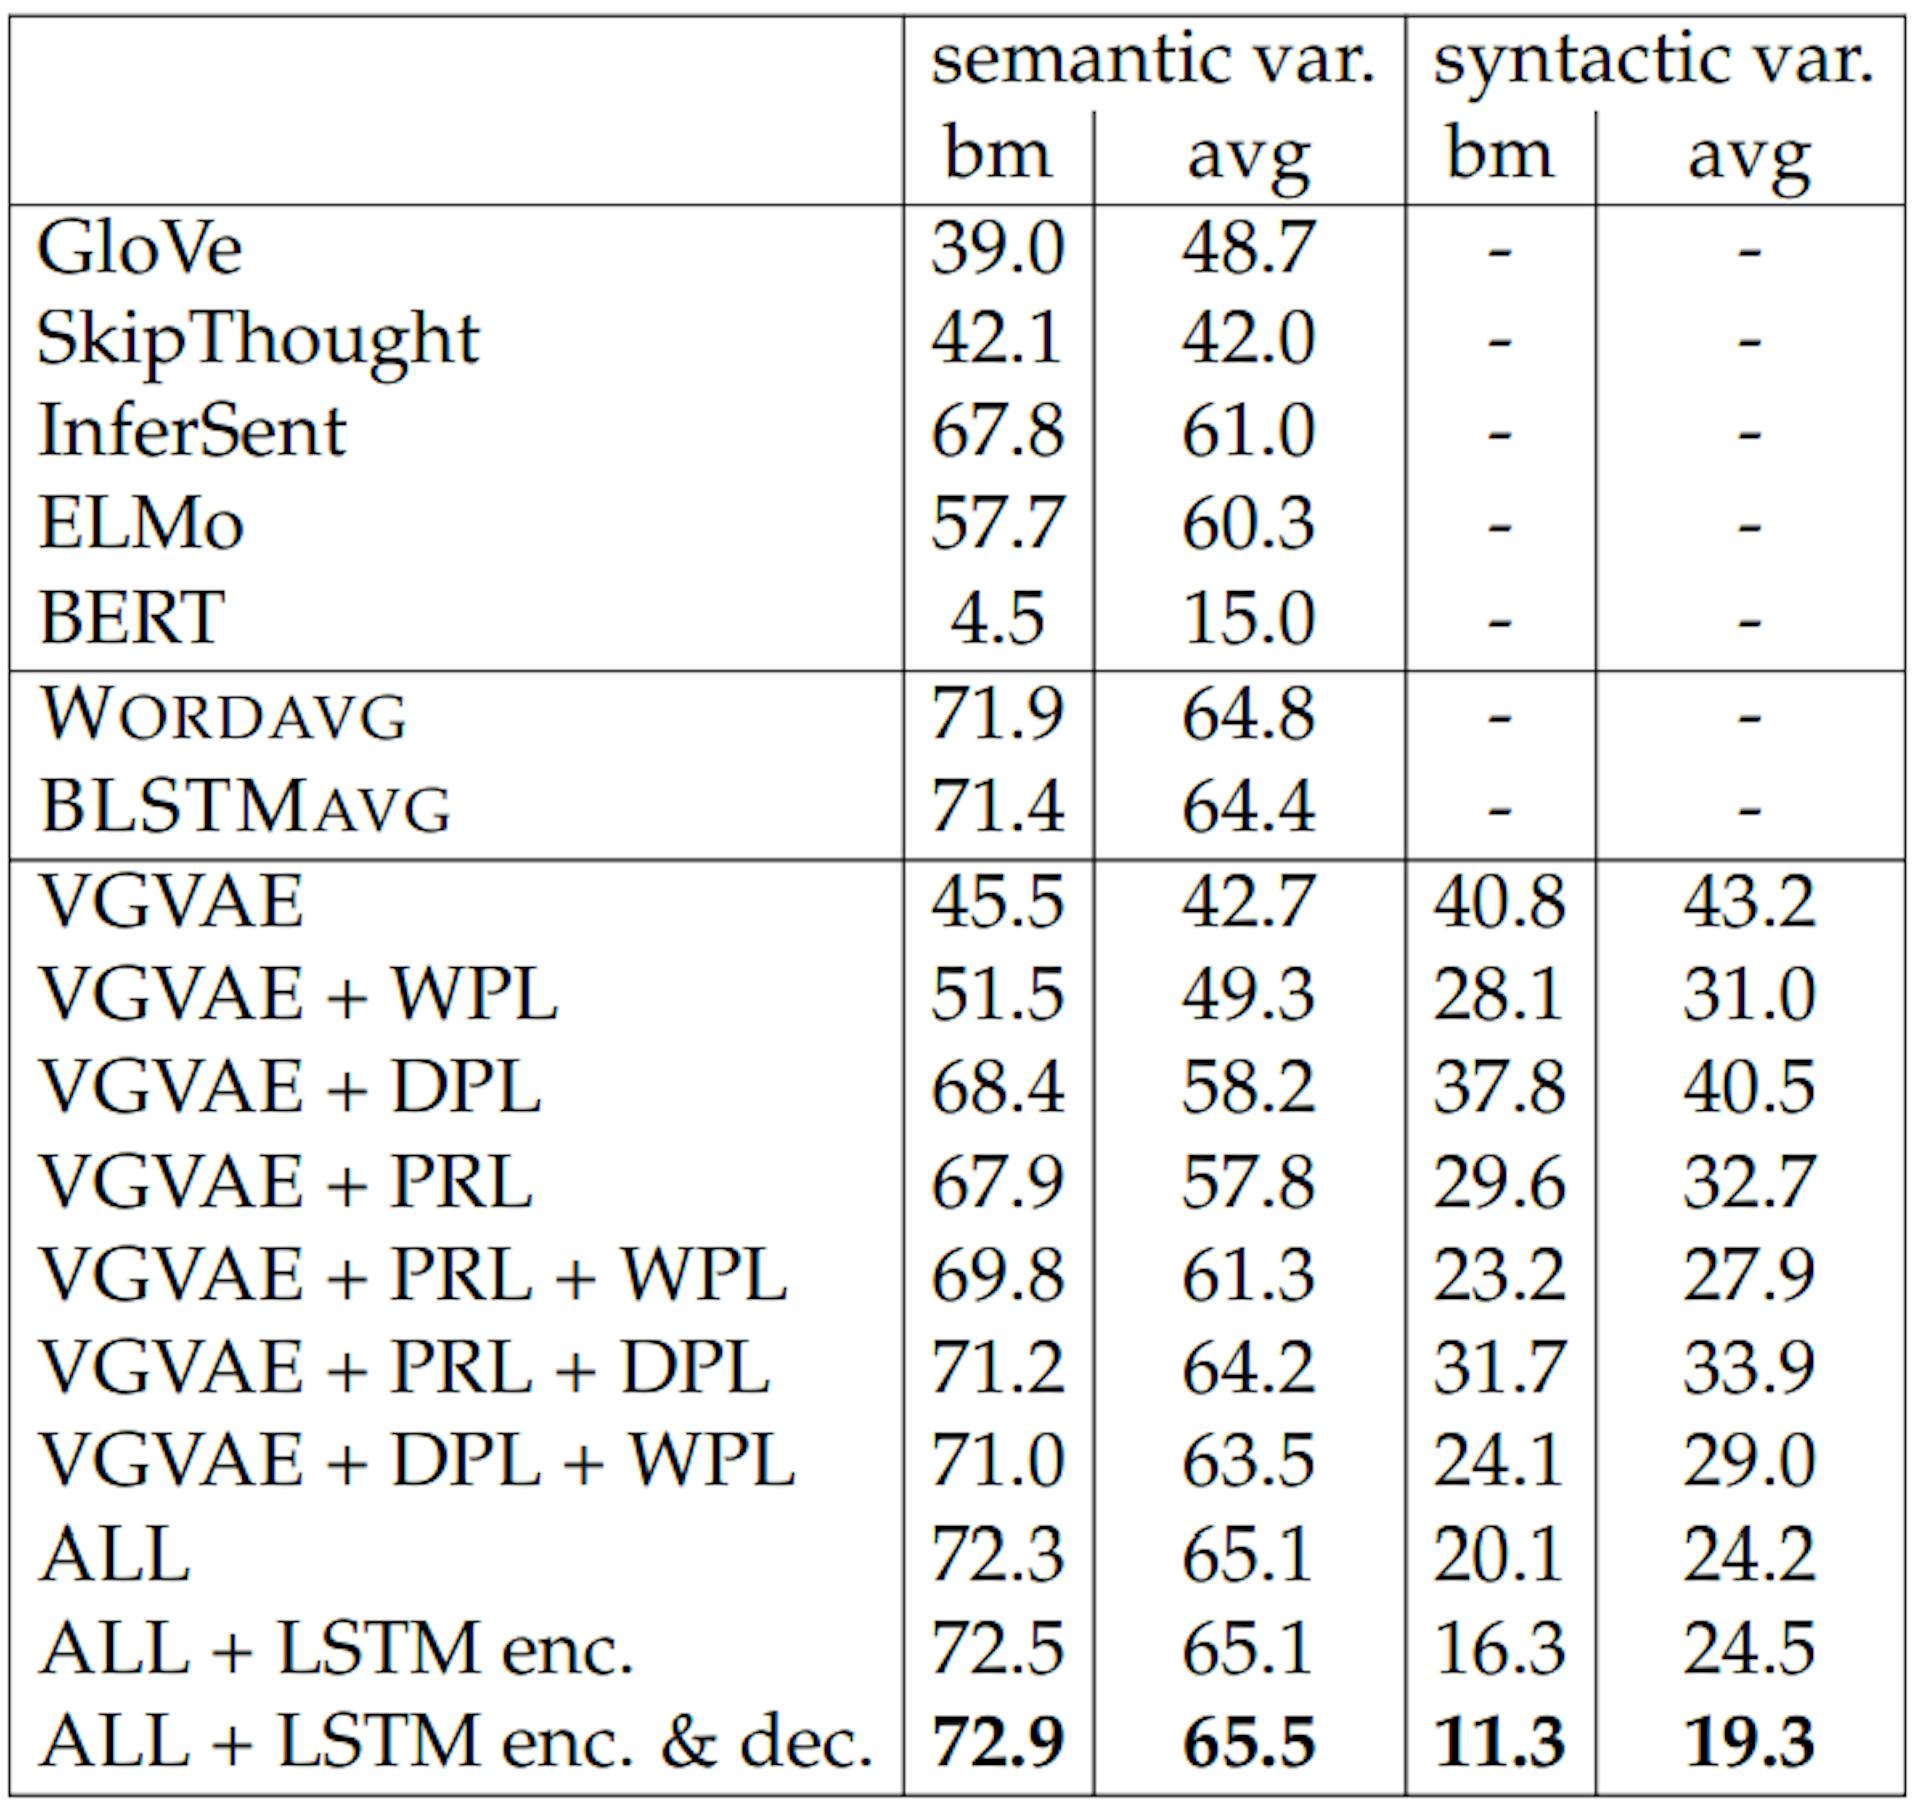 Table 5.1: Pearson correlation (%) for STS test sets. bm: STS benchmark test set. avg: the average of Pearson correlation for each domain in the STS test sets from 2012 to 2016. Results are in bold if they are highest in the “semantic variable” columns or lowest in the “syntactic variable” columns. “ALL” indicates all of the multi-task losses are used.